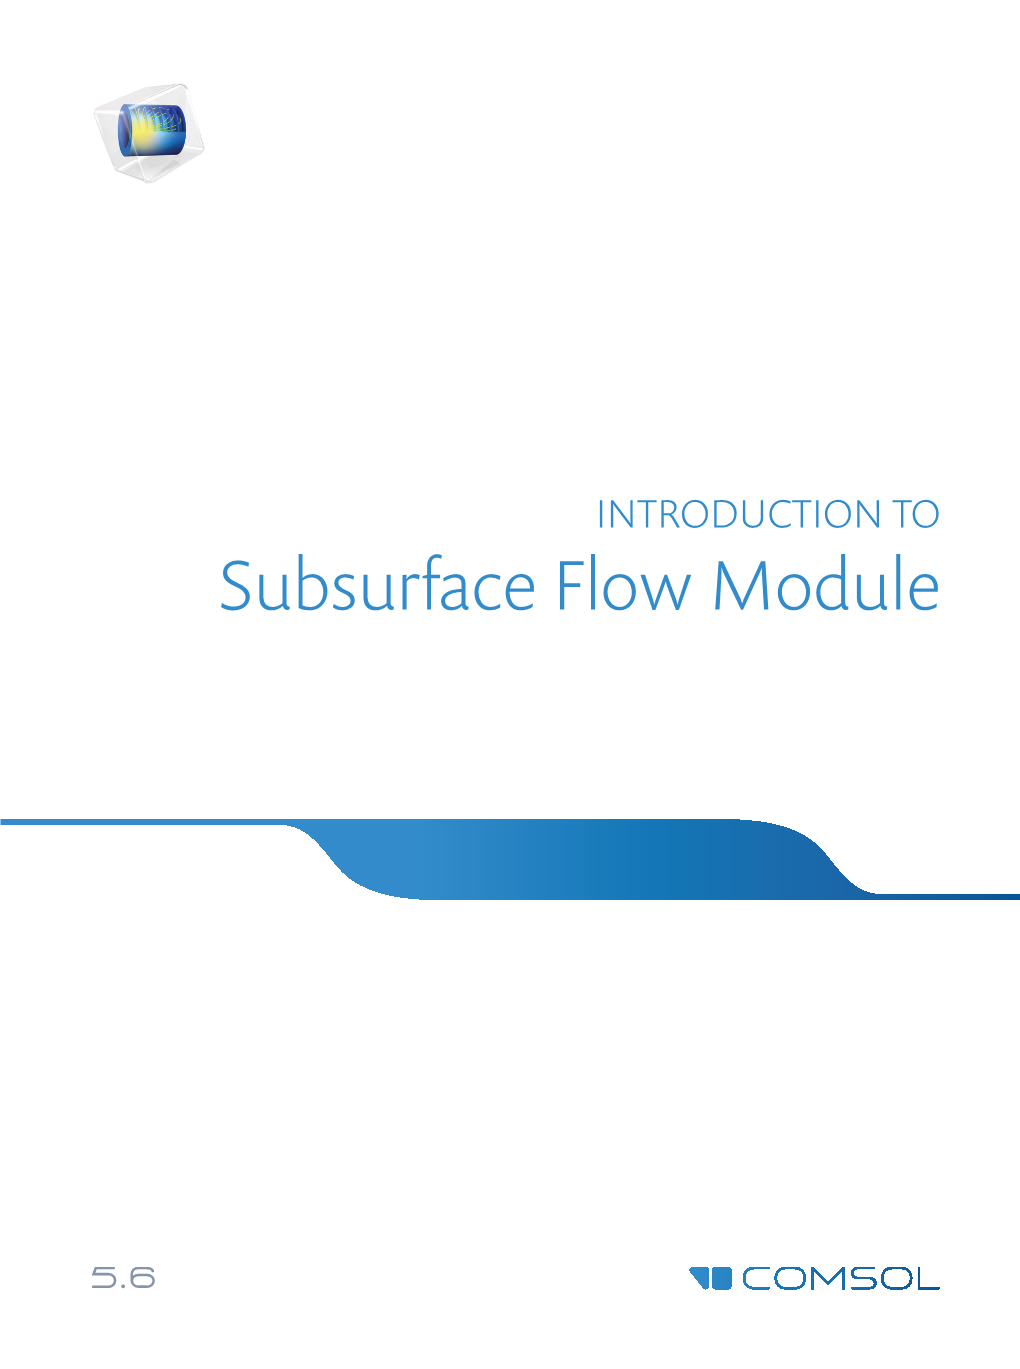 INTRODUCTION to Subsurface Flow Module Introduction to the Subsurface Flow Module